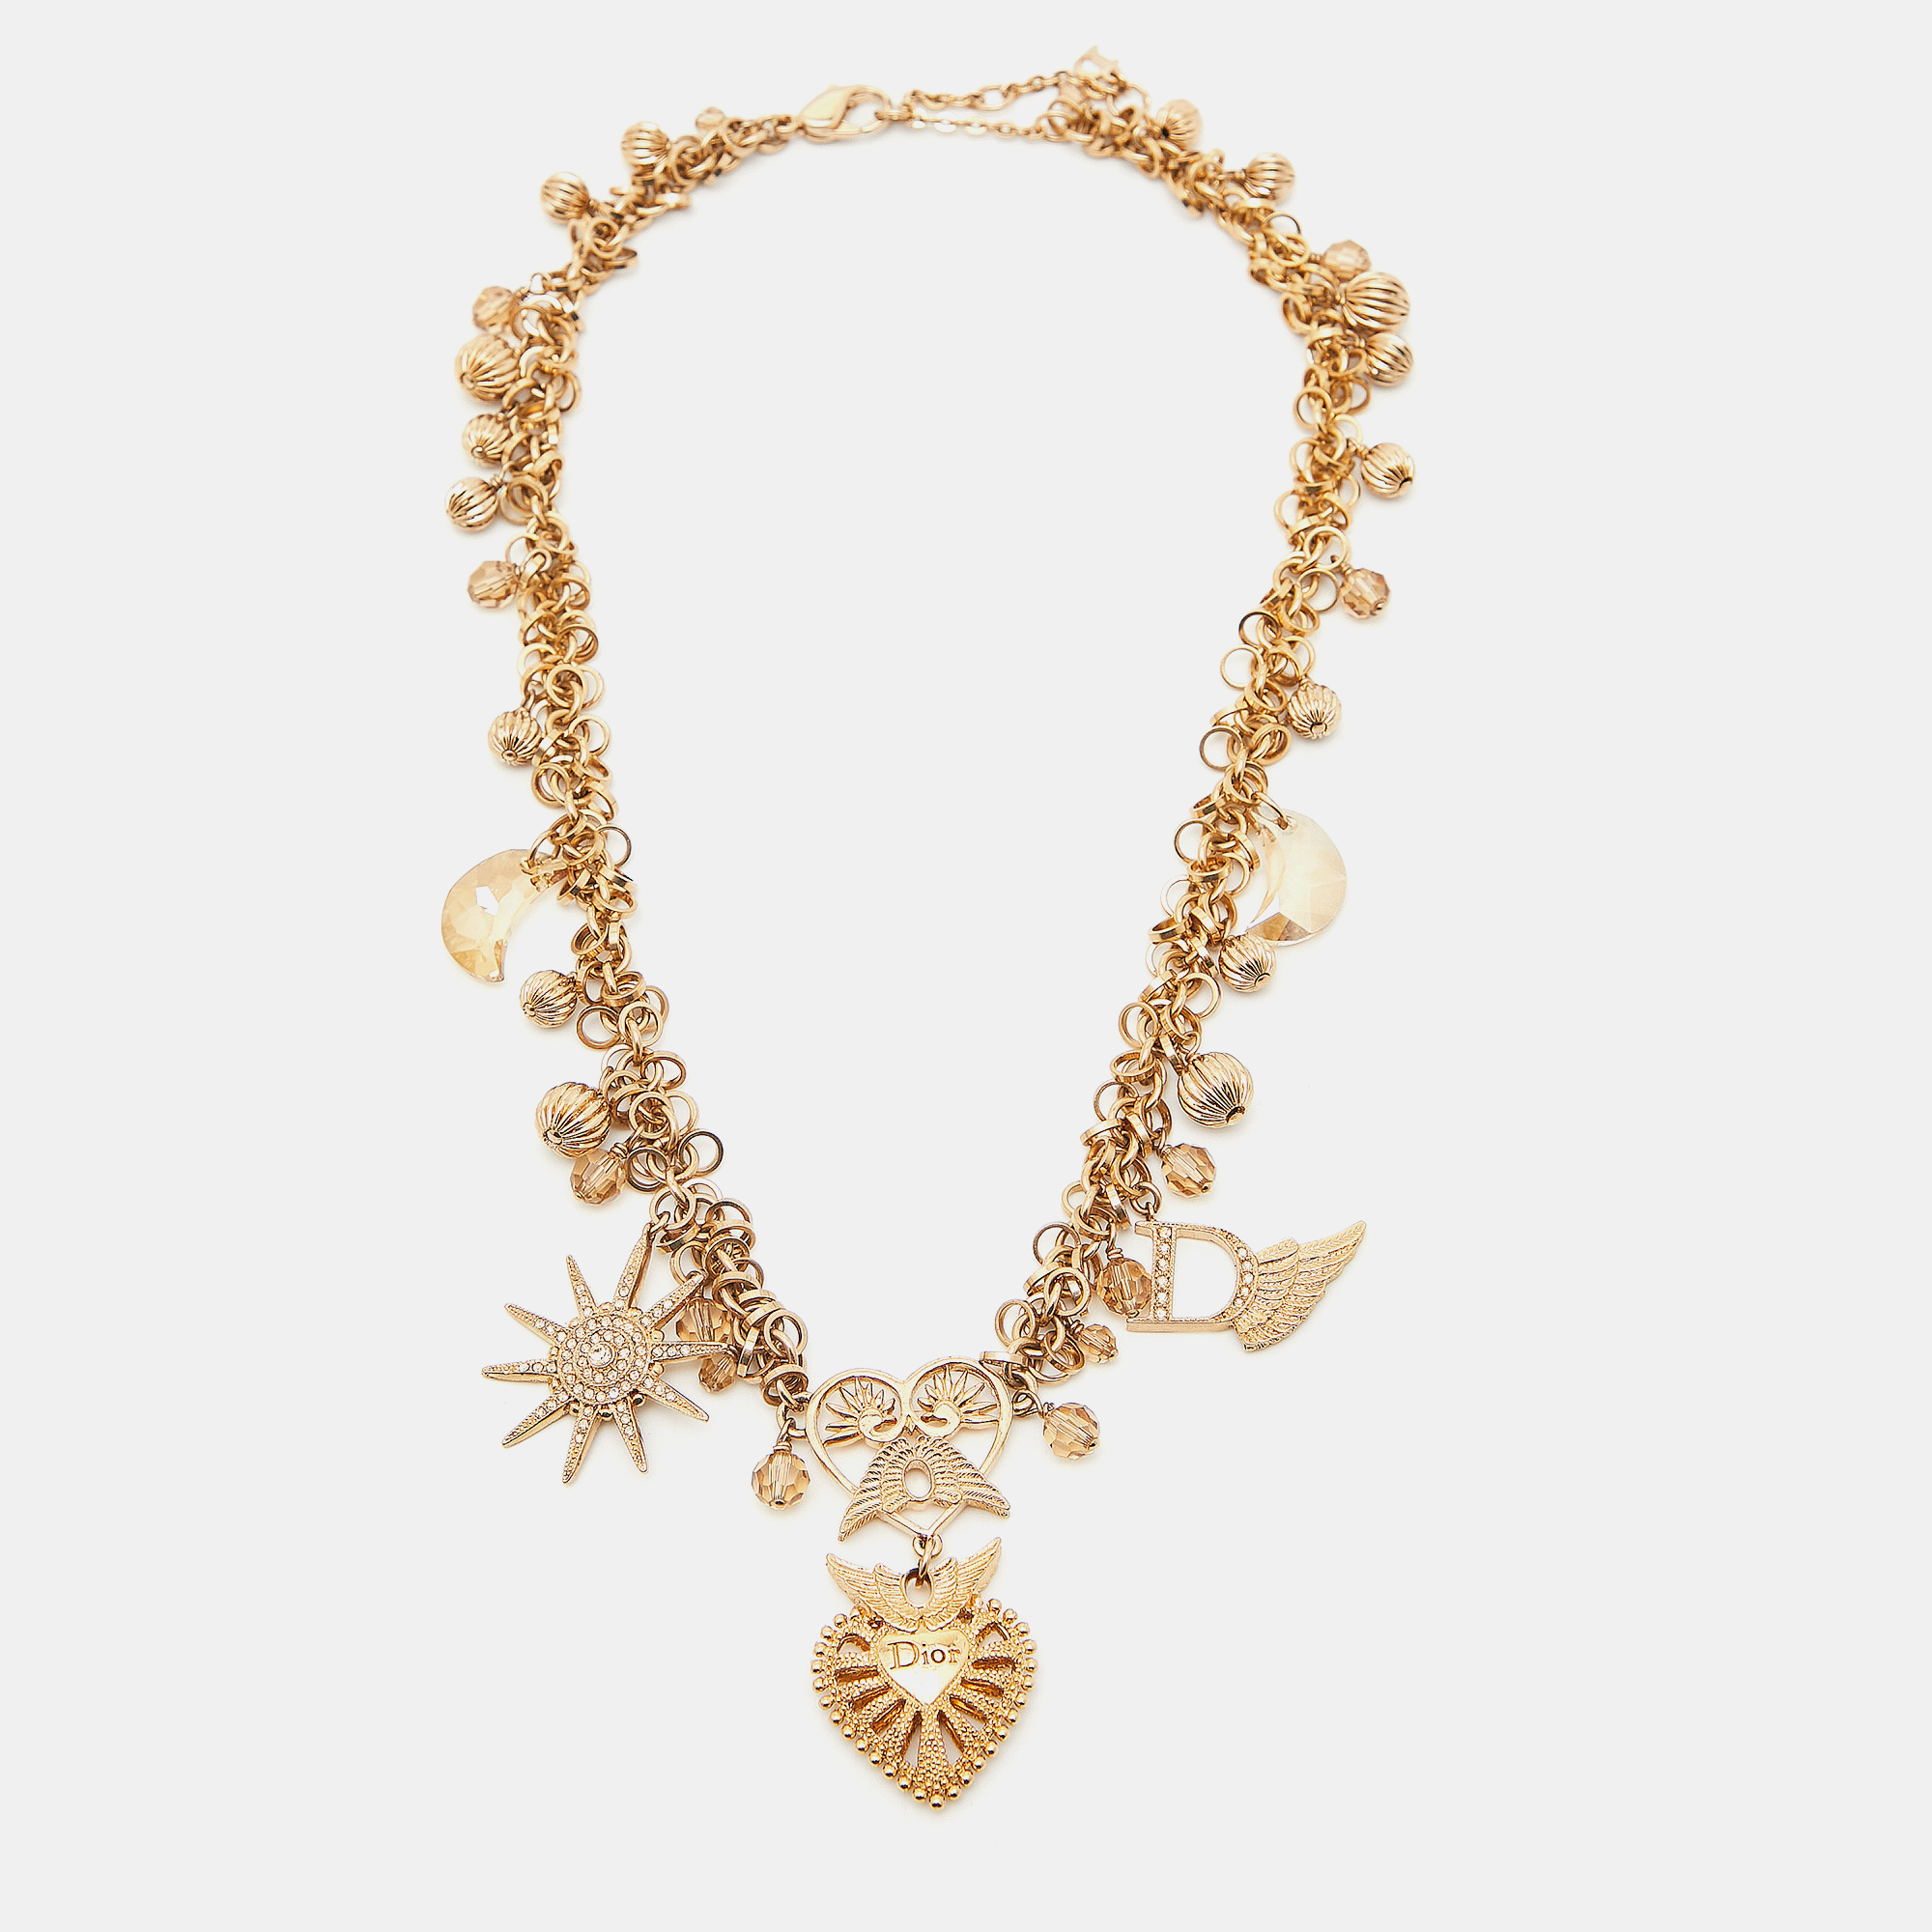 Dior crystals beads gold tone necklace